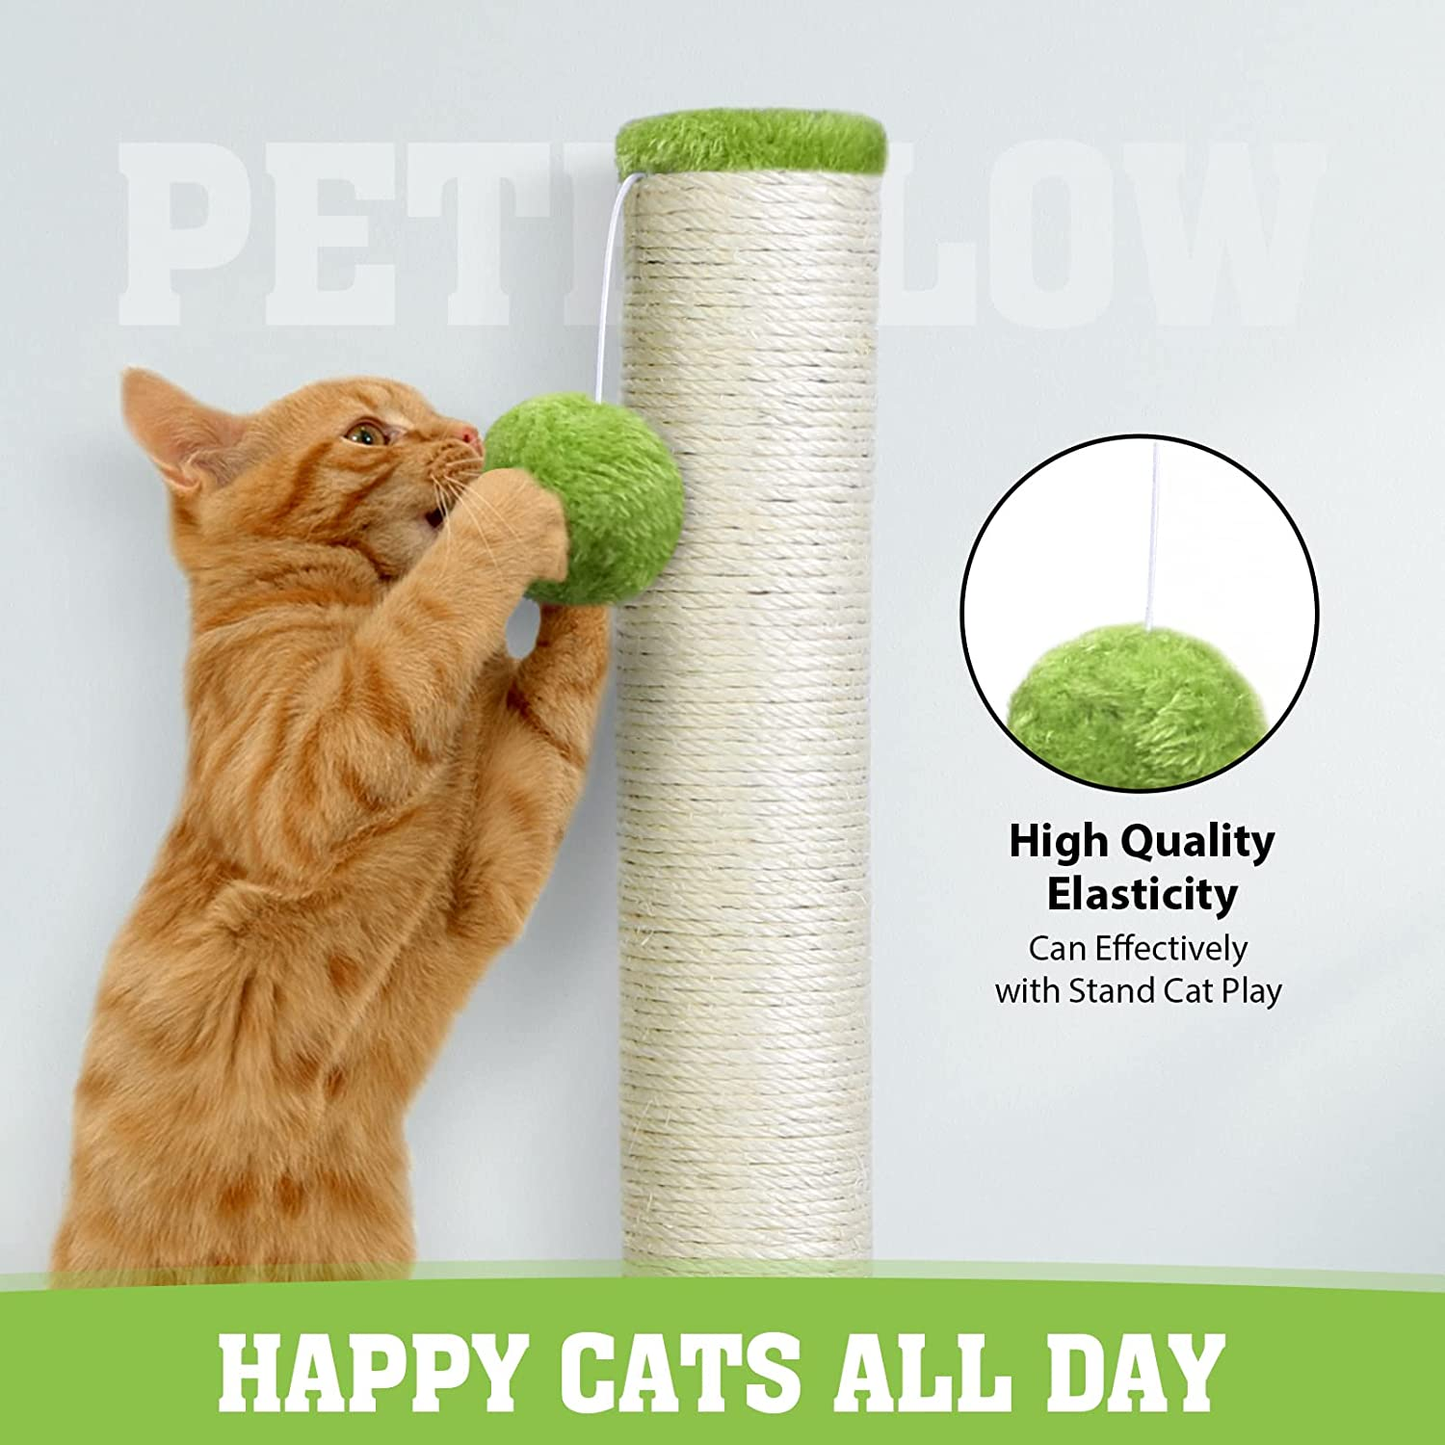 31'' Tall Cat Scratching Post - Cat Claw Scratcher with Hanging Ball - Scratching Posts for Indoor Large Cats - Durable Stable Cat Furniture with Sisal Rope - Cat Scratch Post - Green